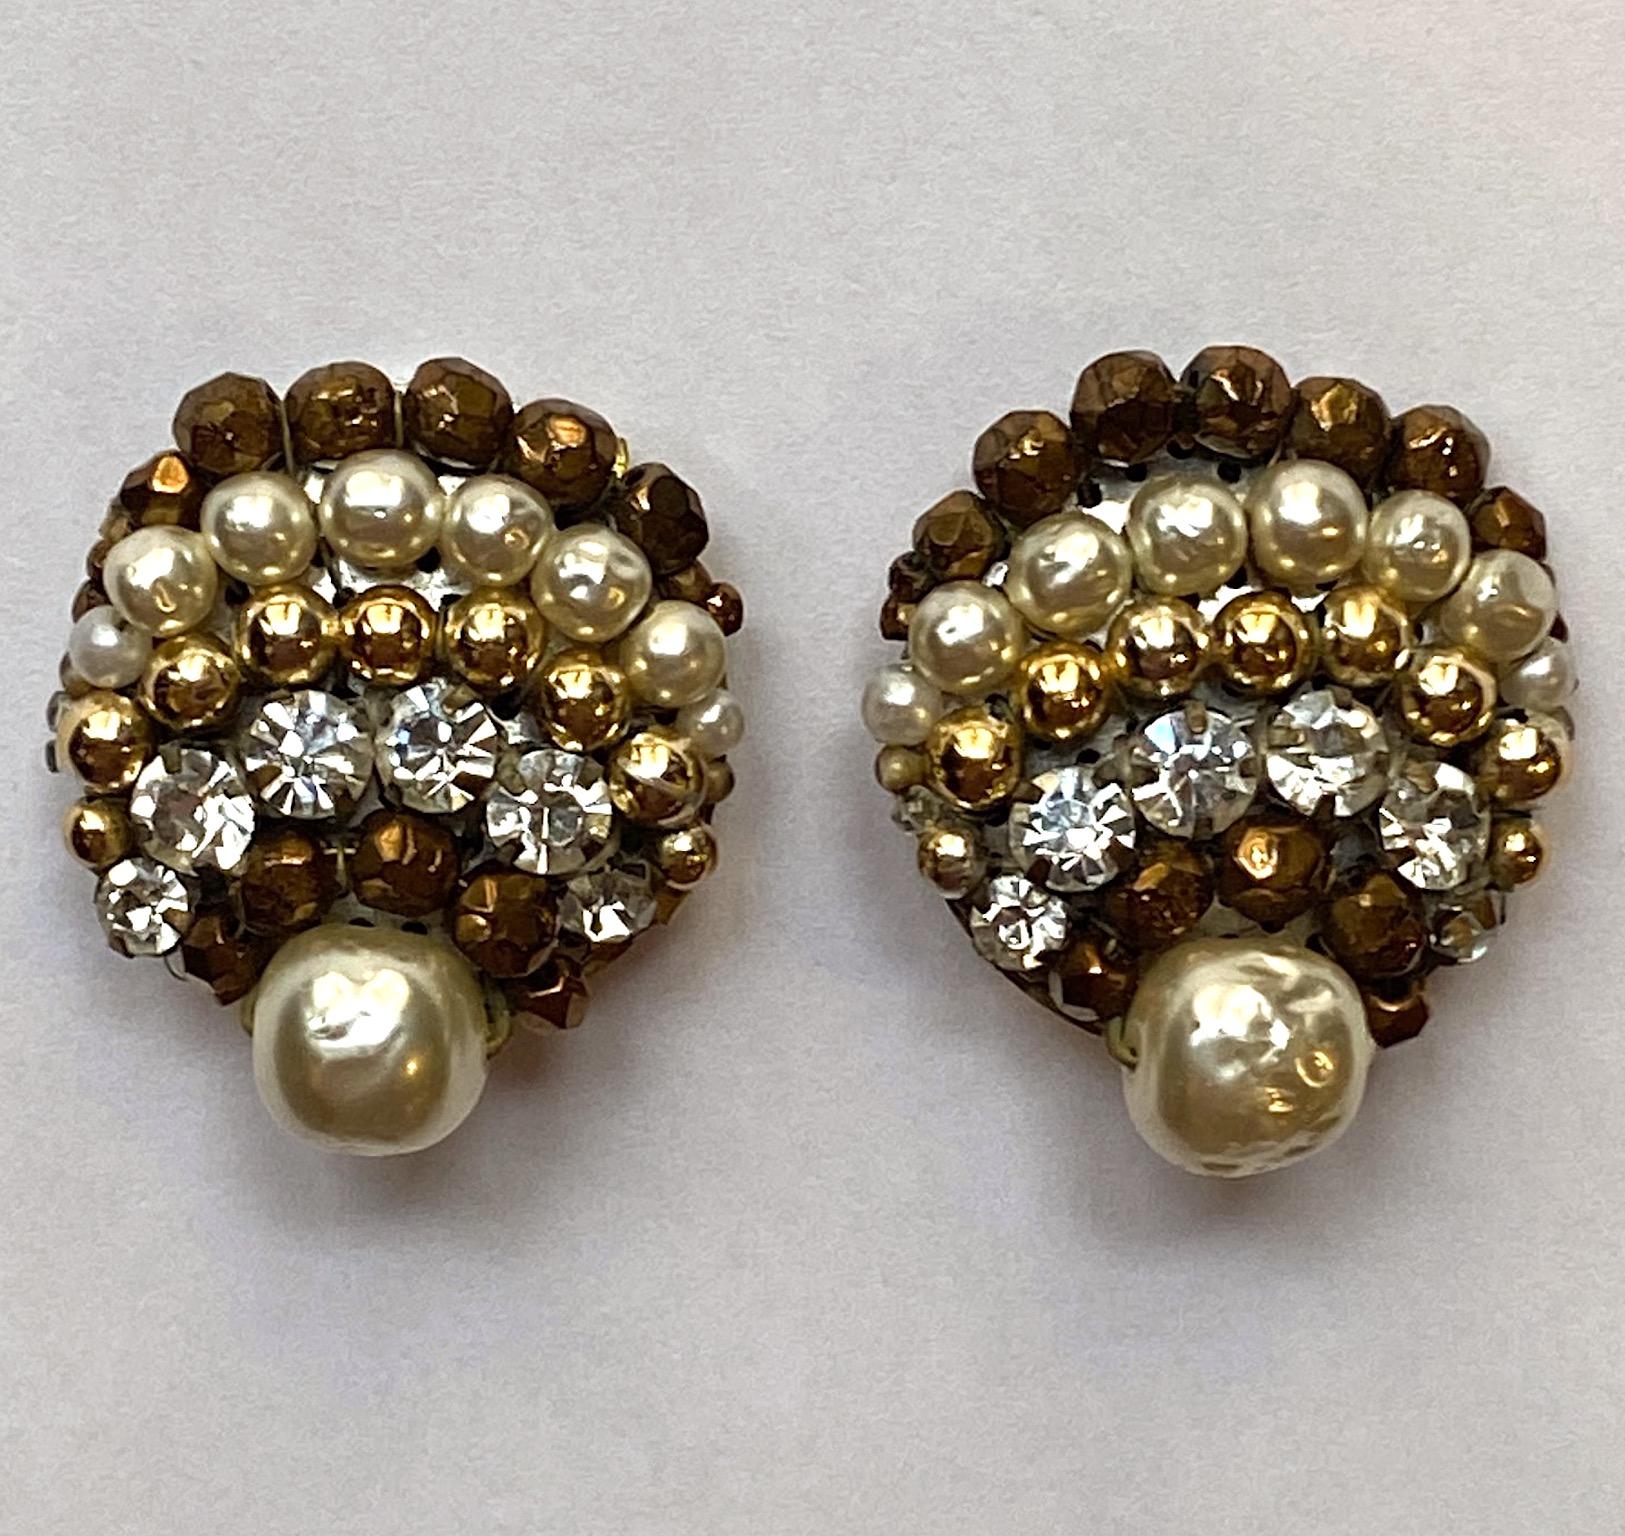 A beautiful pari of 1950s faux Baroque pearl, gold and amber crystal bead button style earring by Italian fashion company Coppala e Toppo. Each earring is accented with four round rhinestones and one large 8 mm size faux Baroque pearl at the bottom.